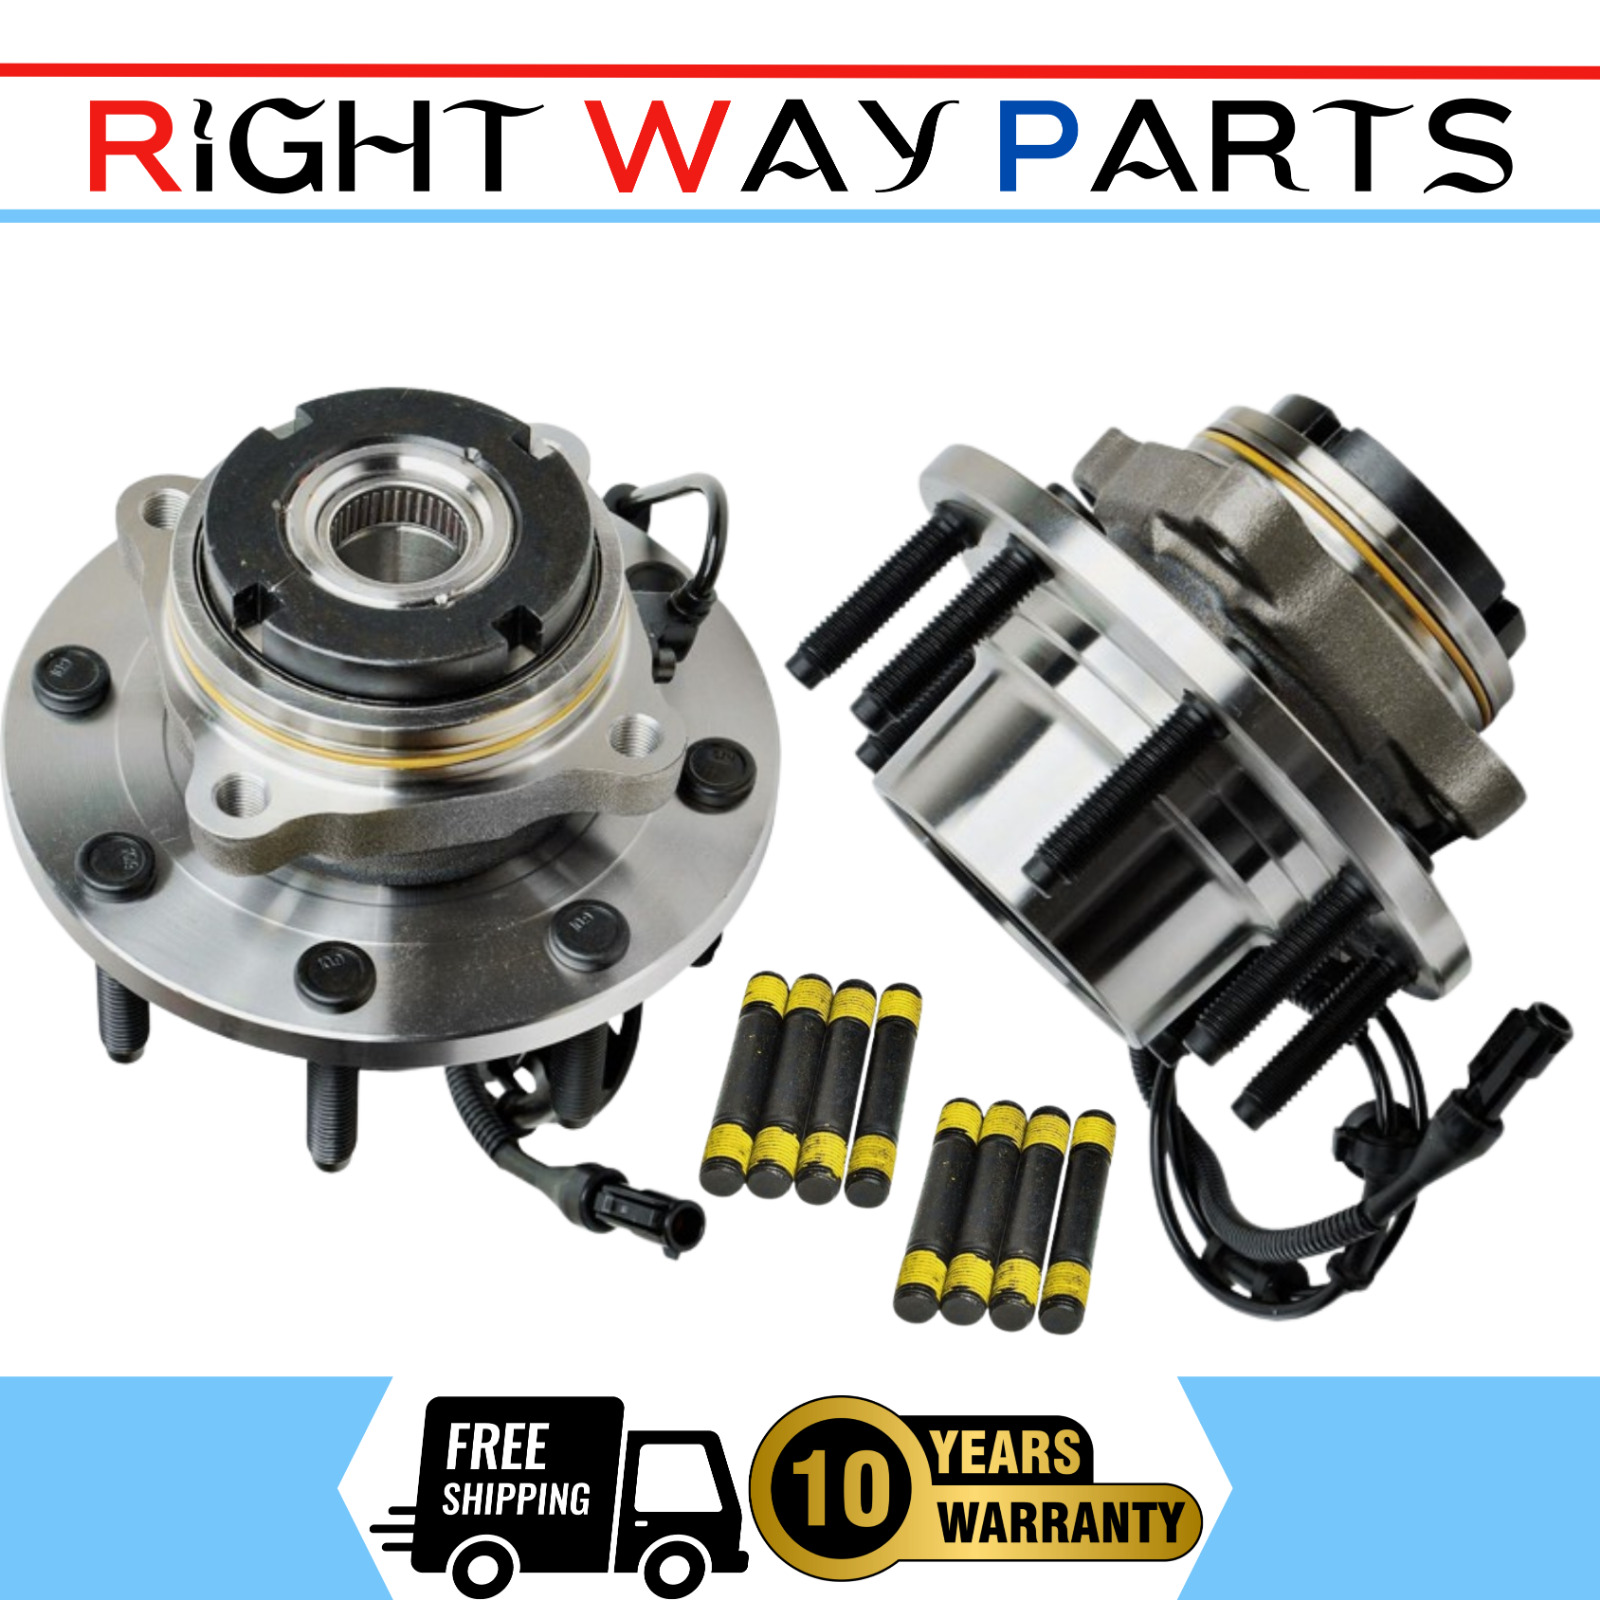 Pair 4WD Front Wheel Bearings and Hubs for 99 - 02 Ford F-250 F-350 SD Excursion